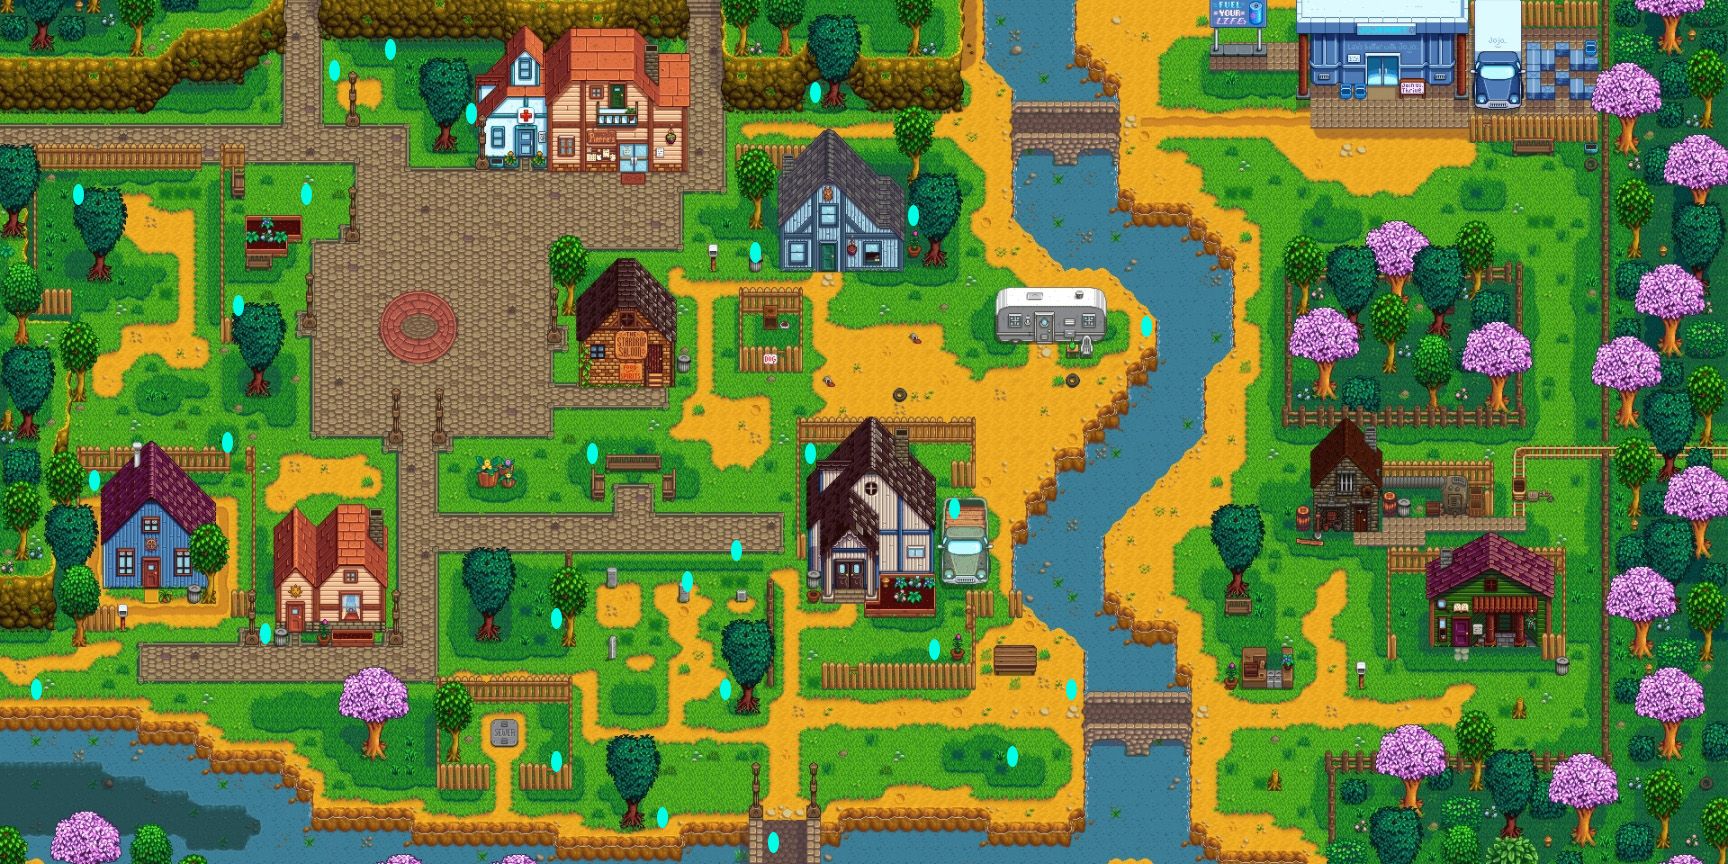 Egg locations for Egg Hunt in Stardew Valley